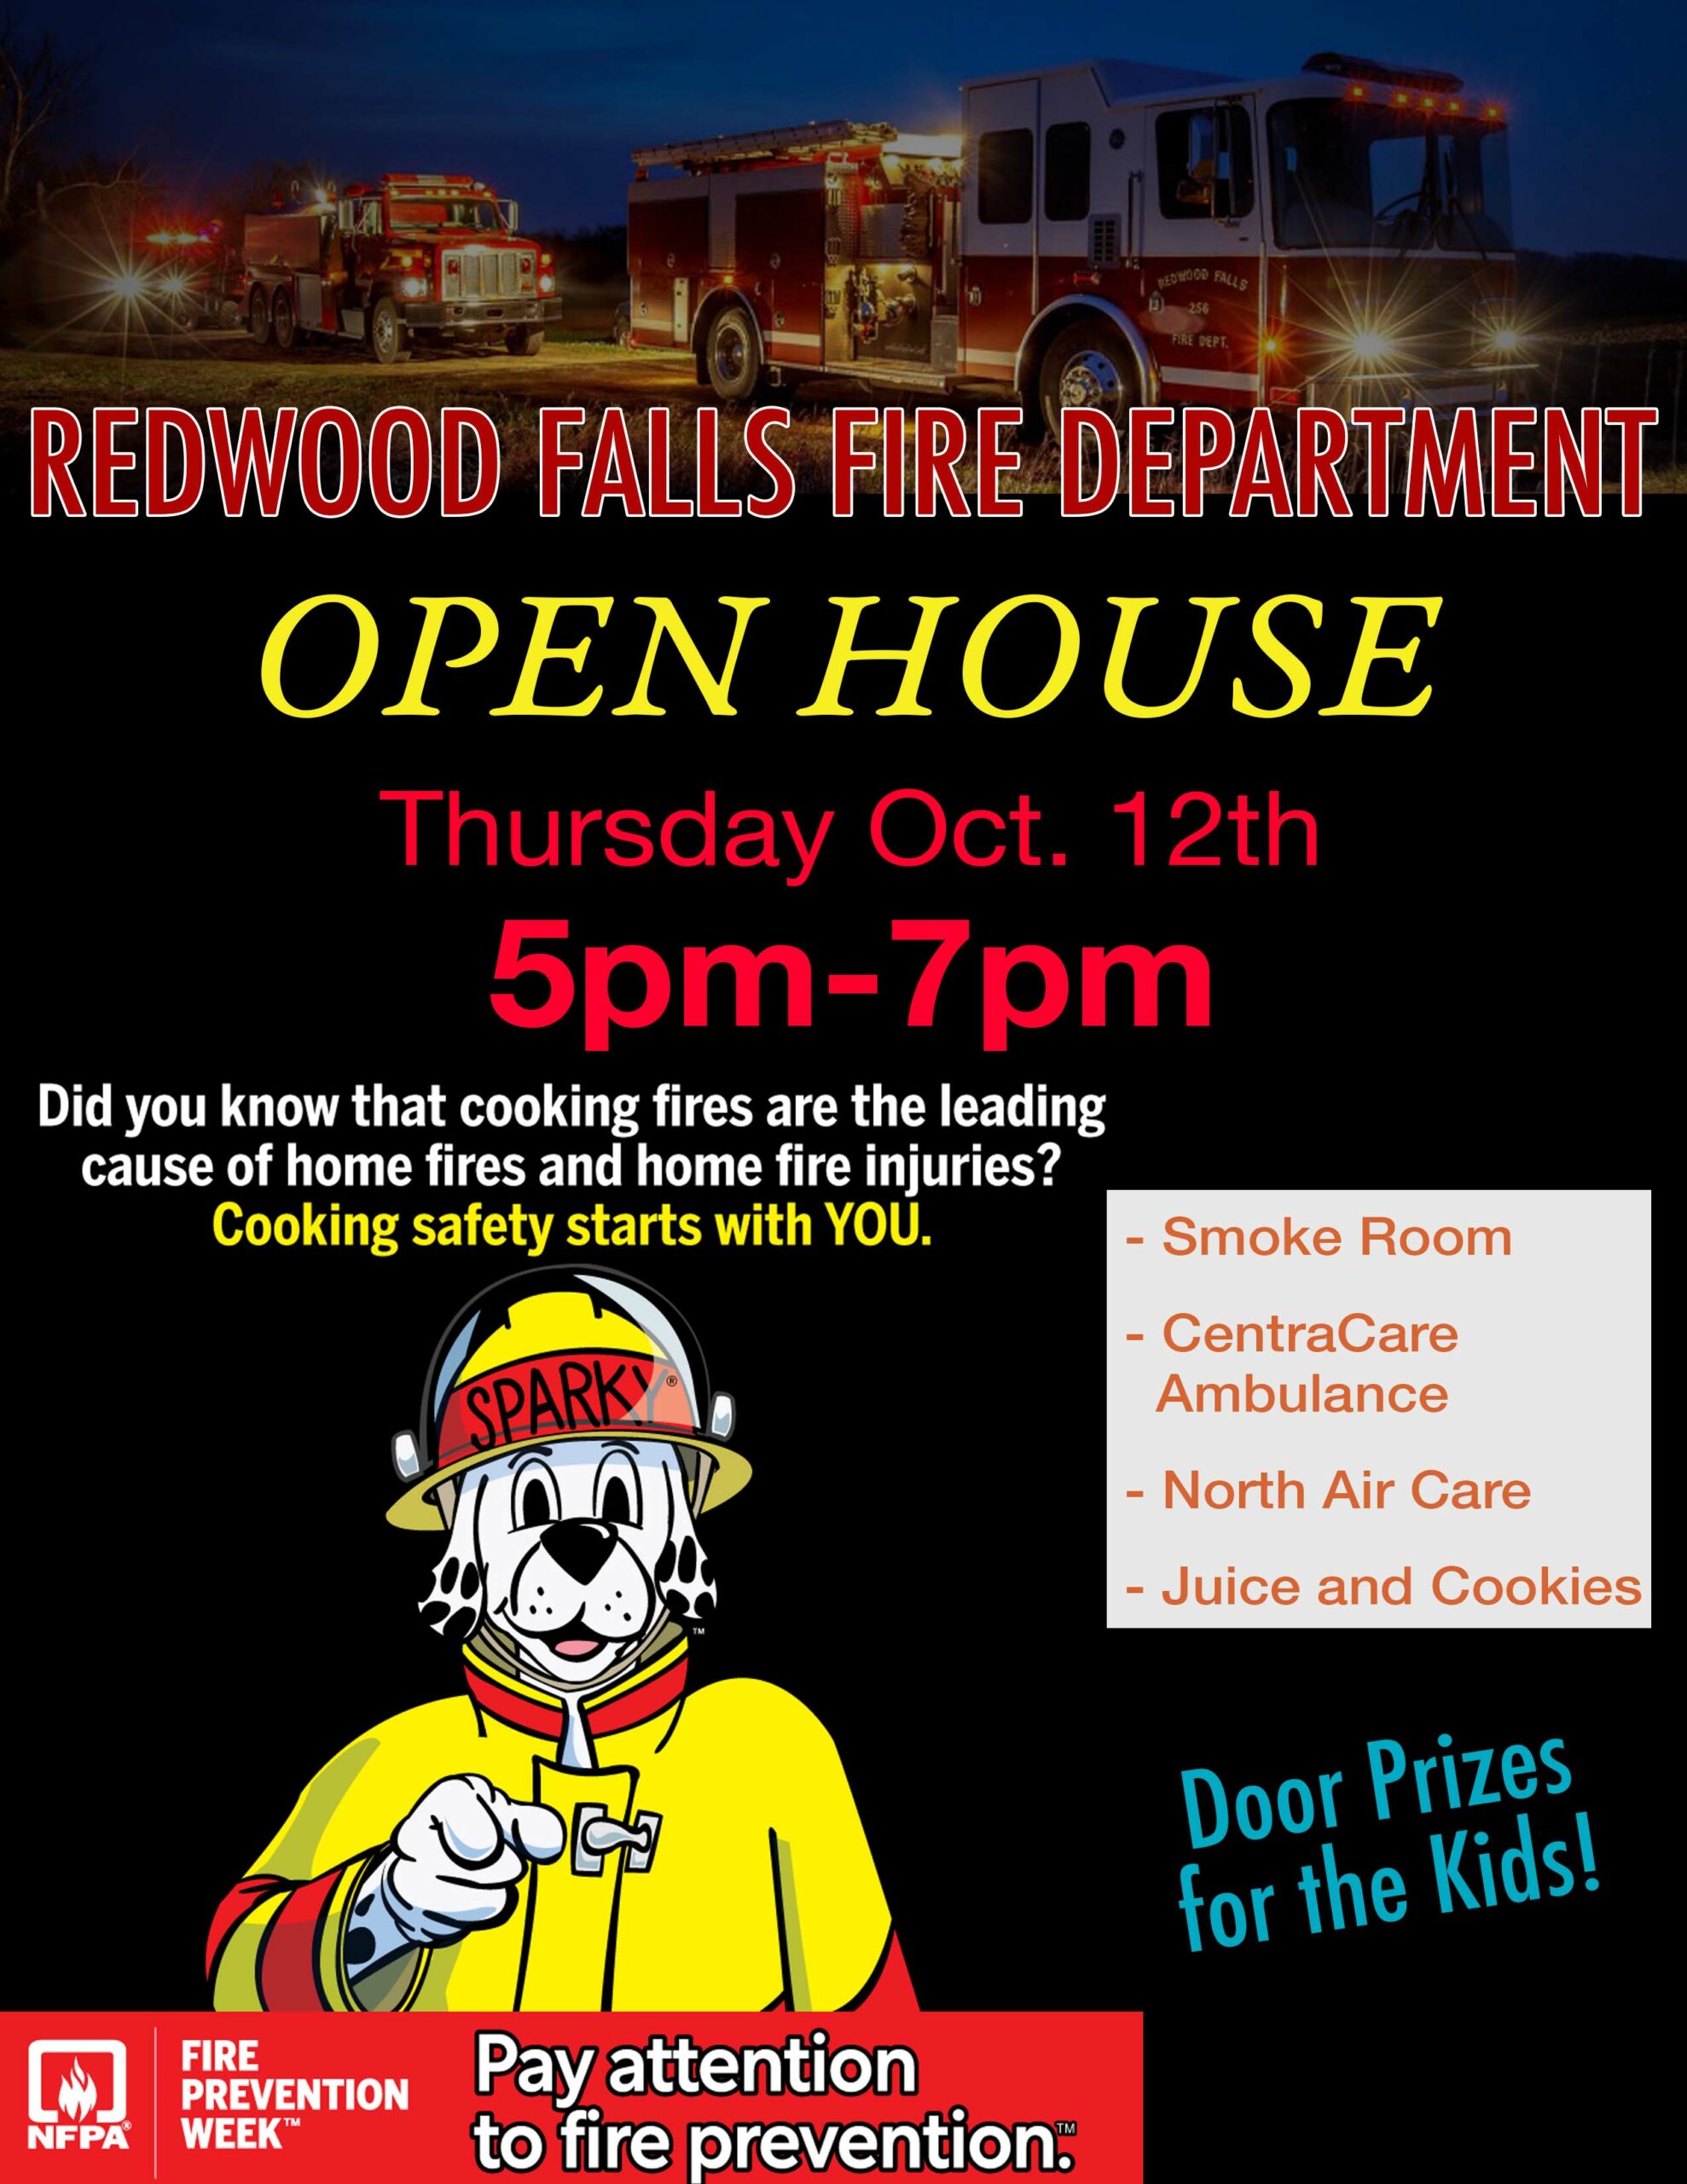 <h1 class="tribe-events-single-event-title">Redwood Falls Fire Department Open House</h1>